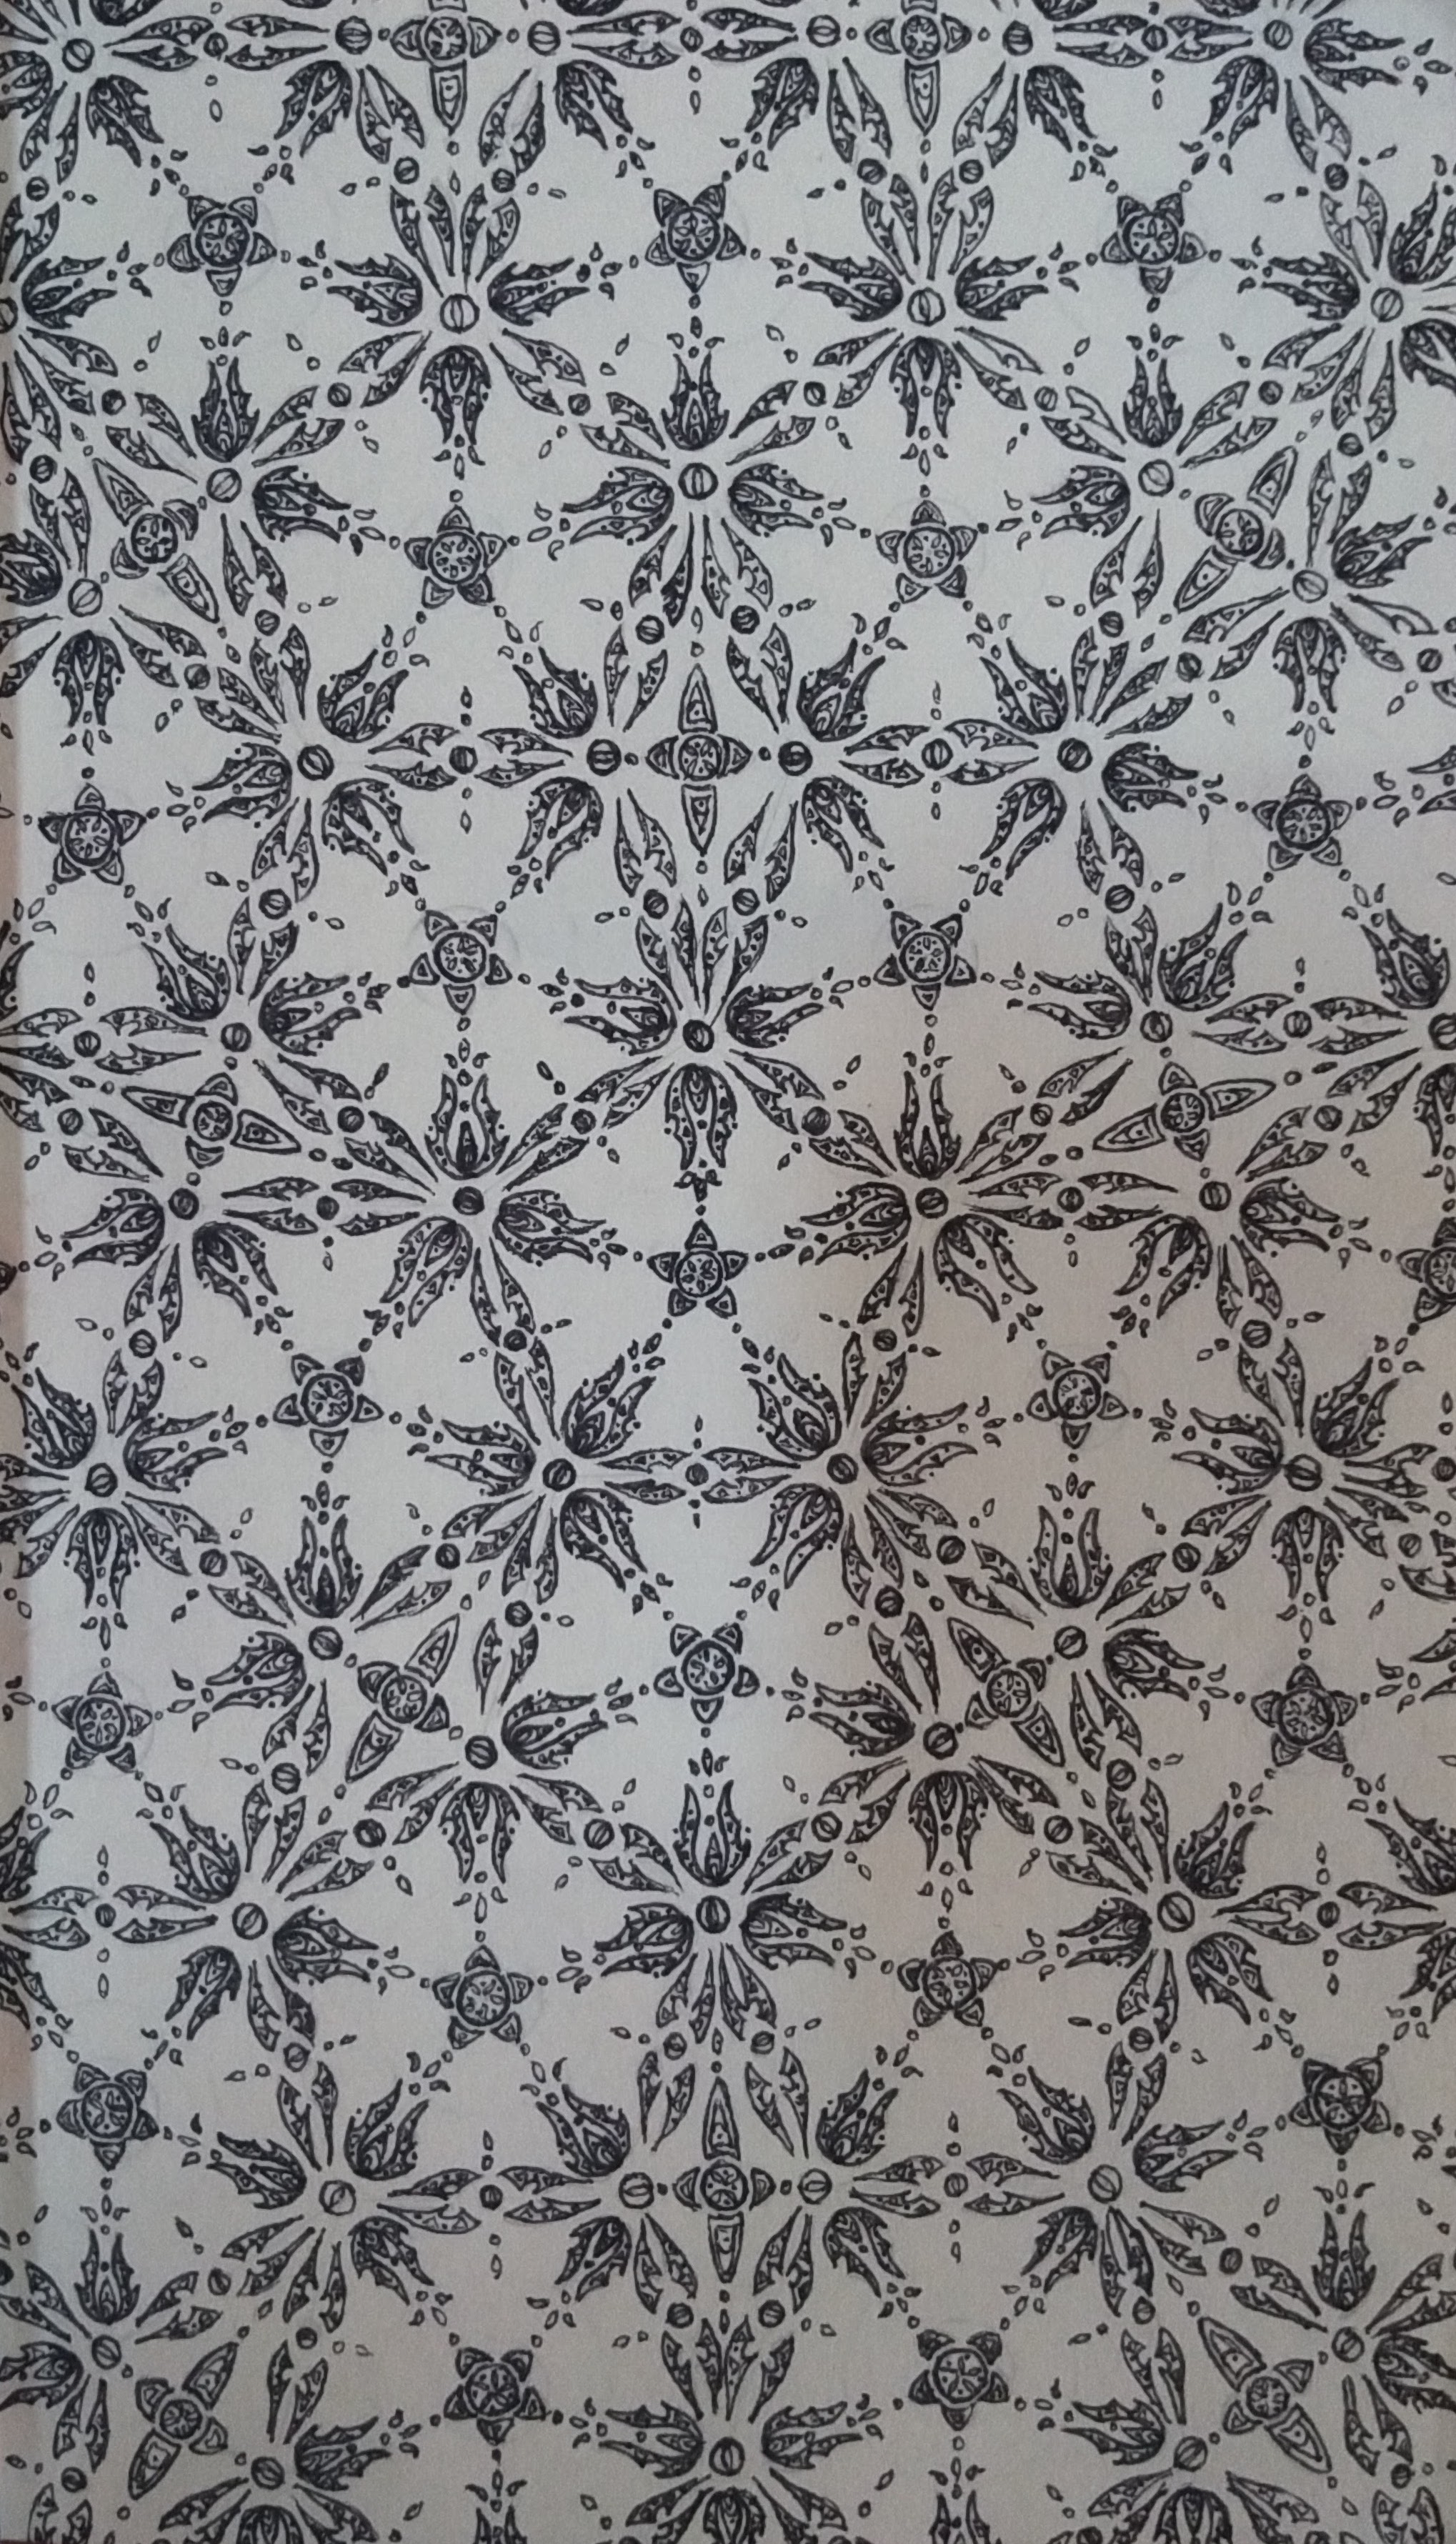 an ornate pattern laid over tessellating pentagons and diamonds